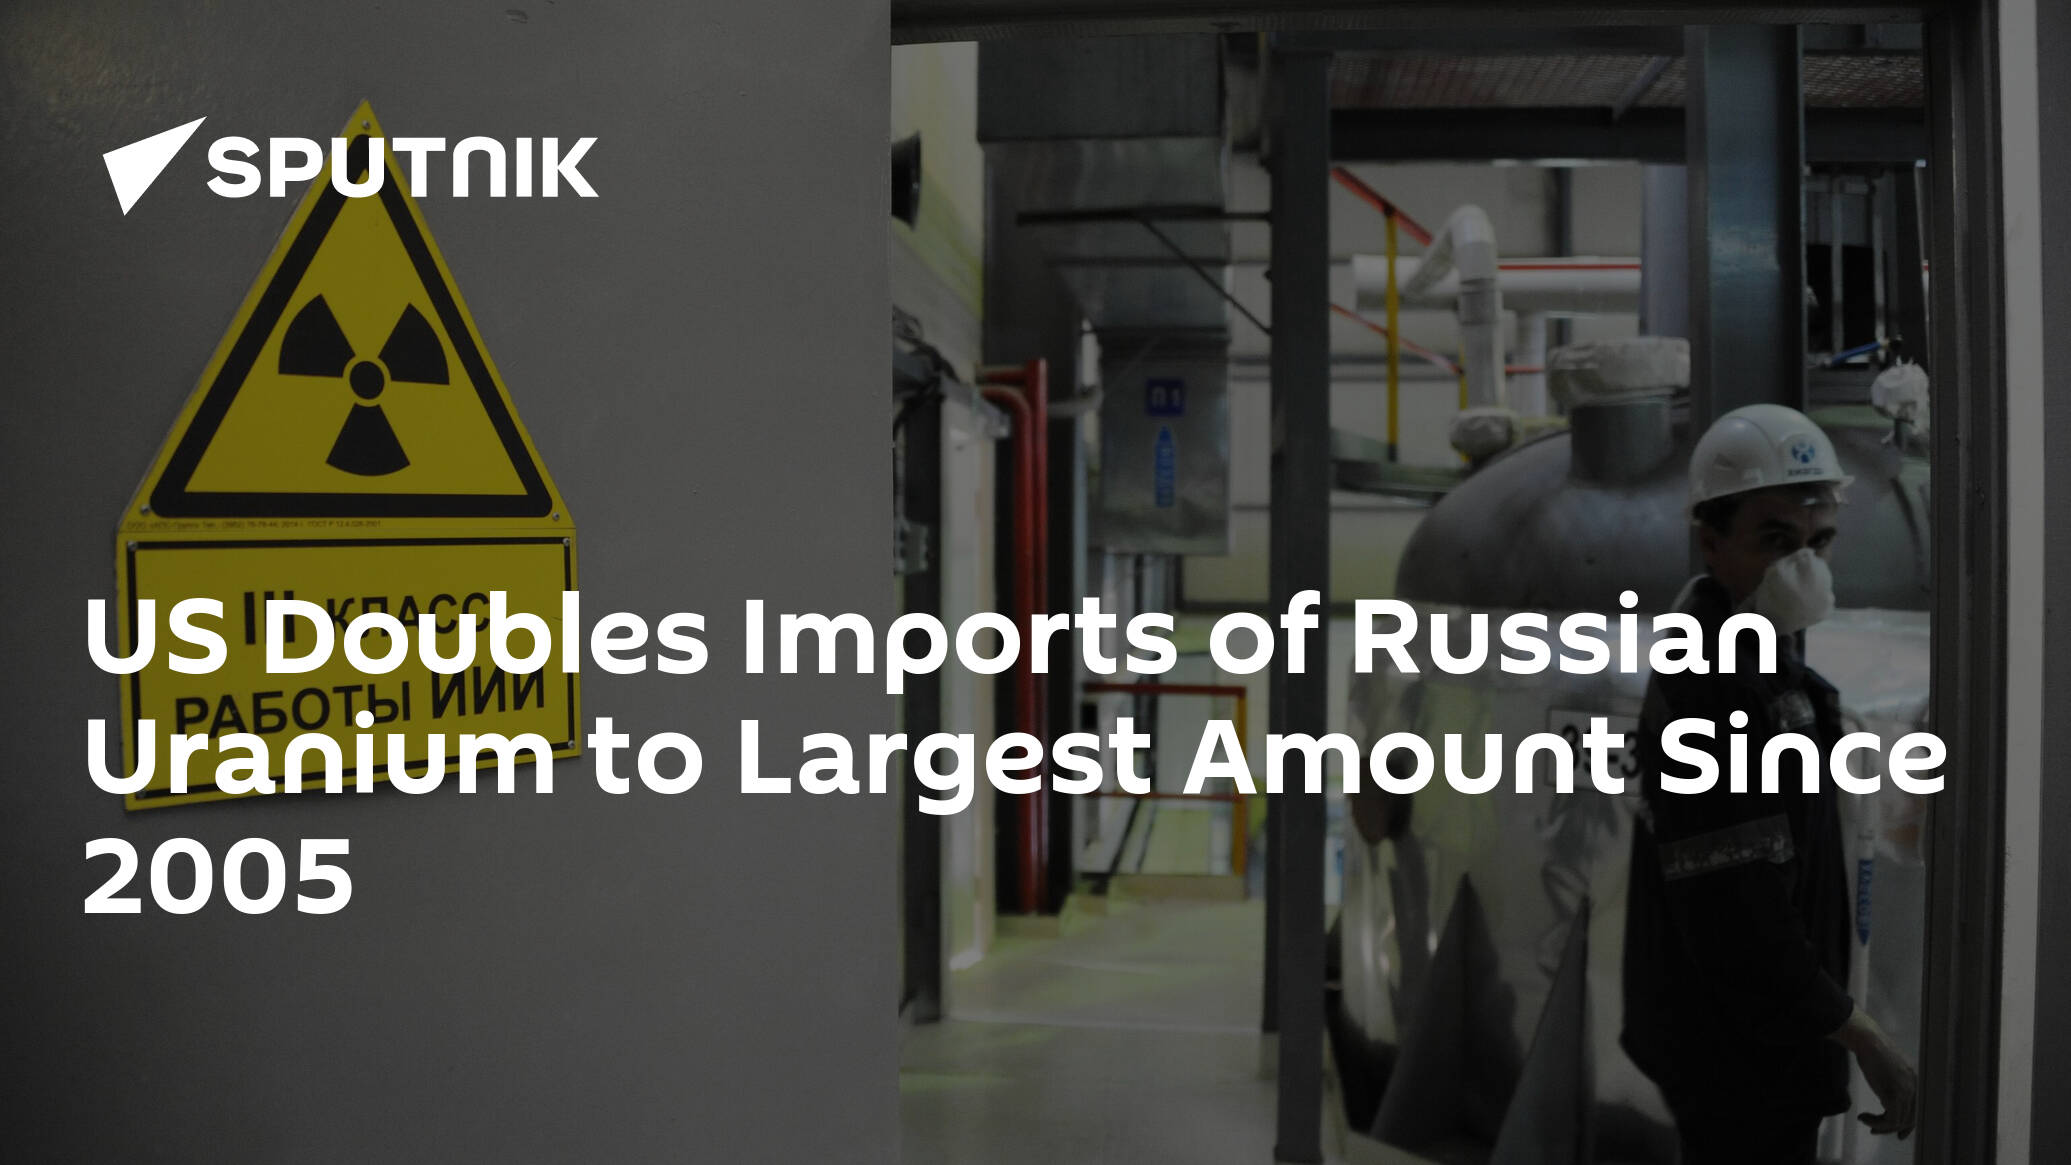 US Doubles Imports of Russian Uranium to Largest Amount Since 2005